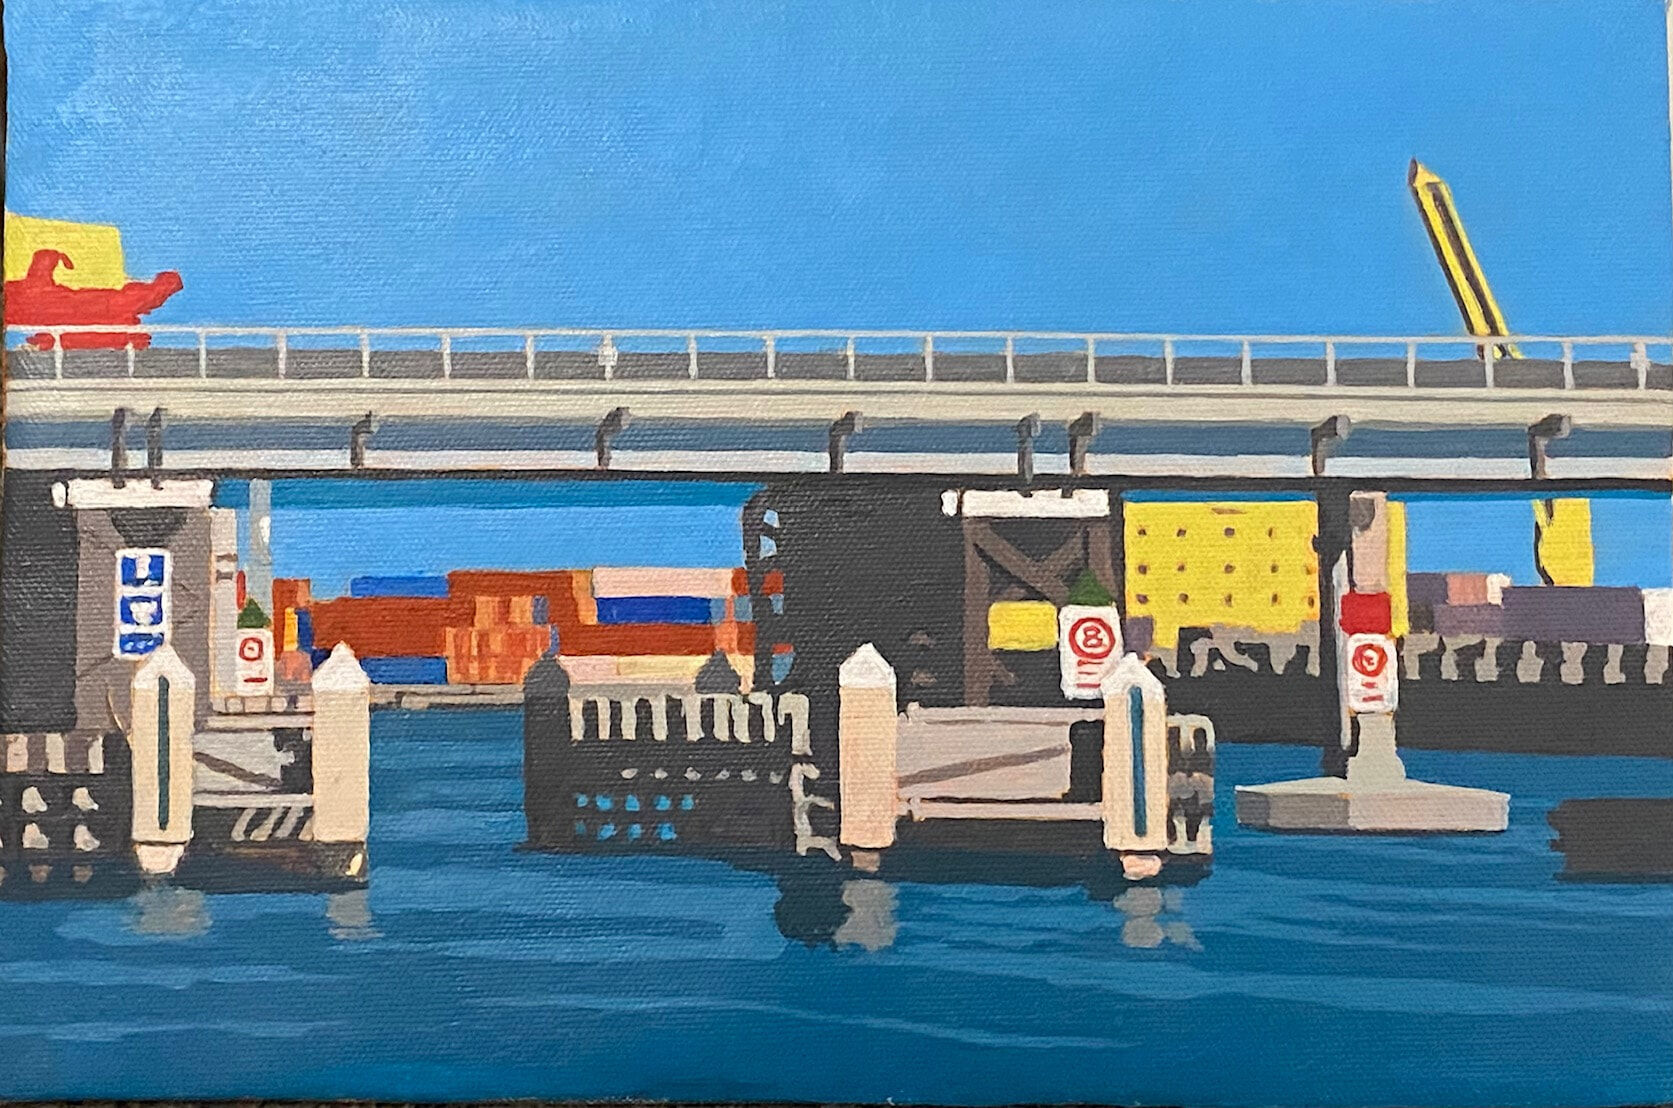 Fremantle Traffic Bridge, from the East acrylic on canvas, 20 by 30cm